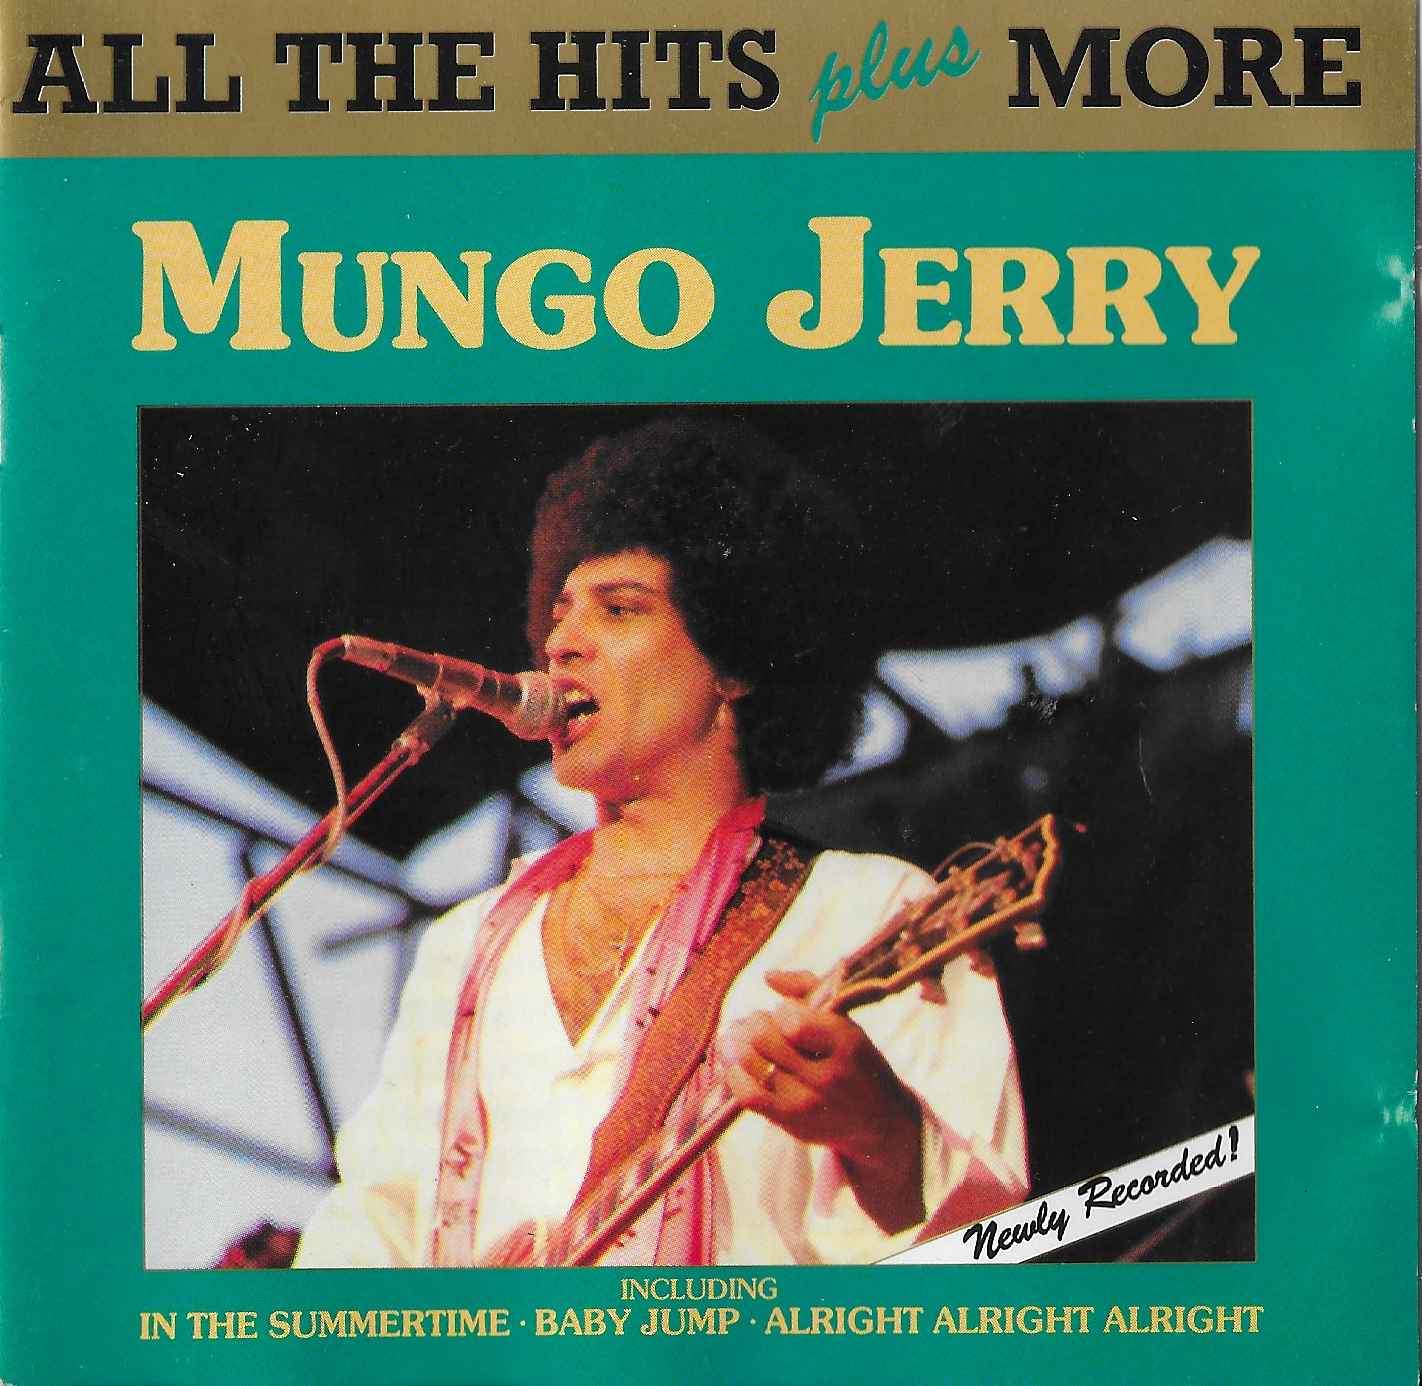 Picture of CDPT 002 All the hits plus more by artist Mungo Jerry from the BBC cds - Records and Tapes library